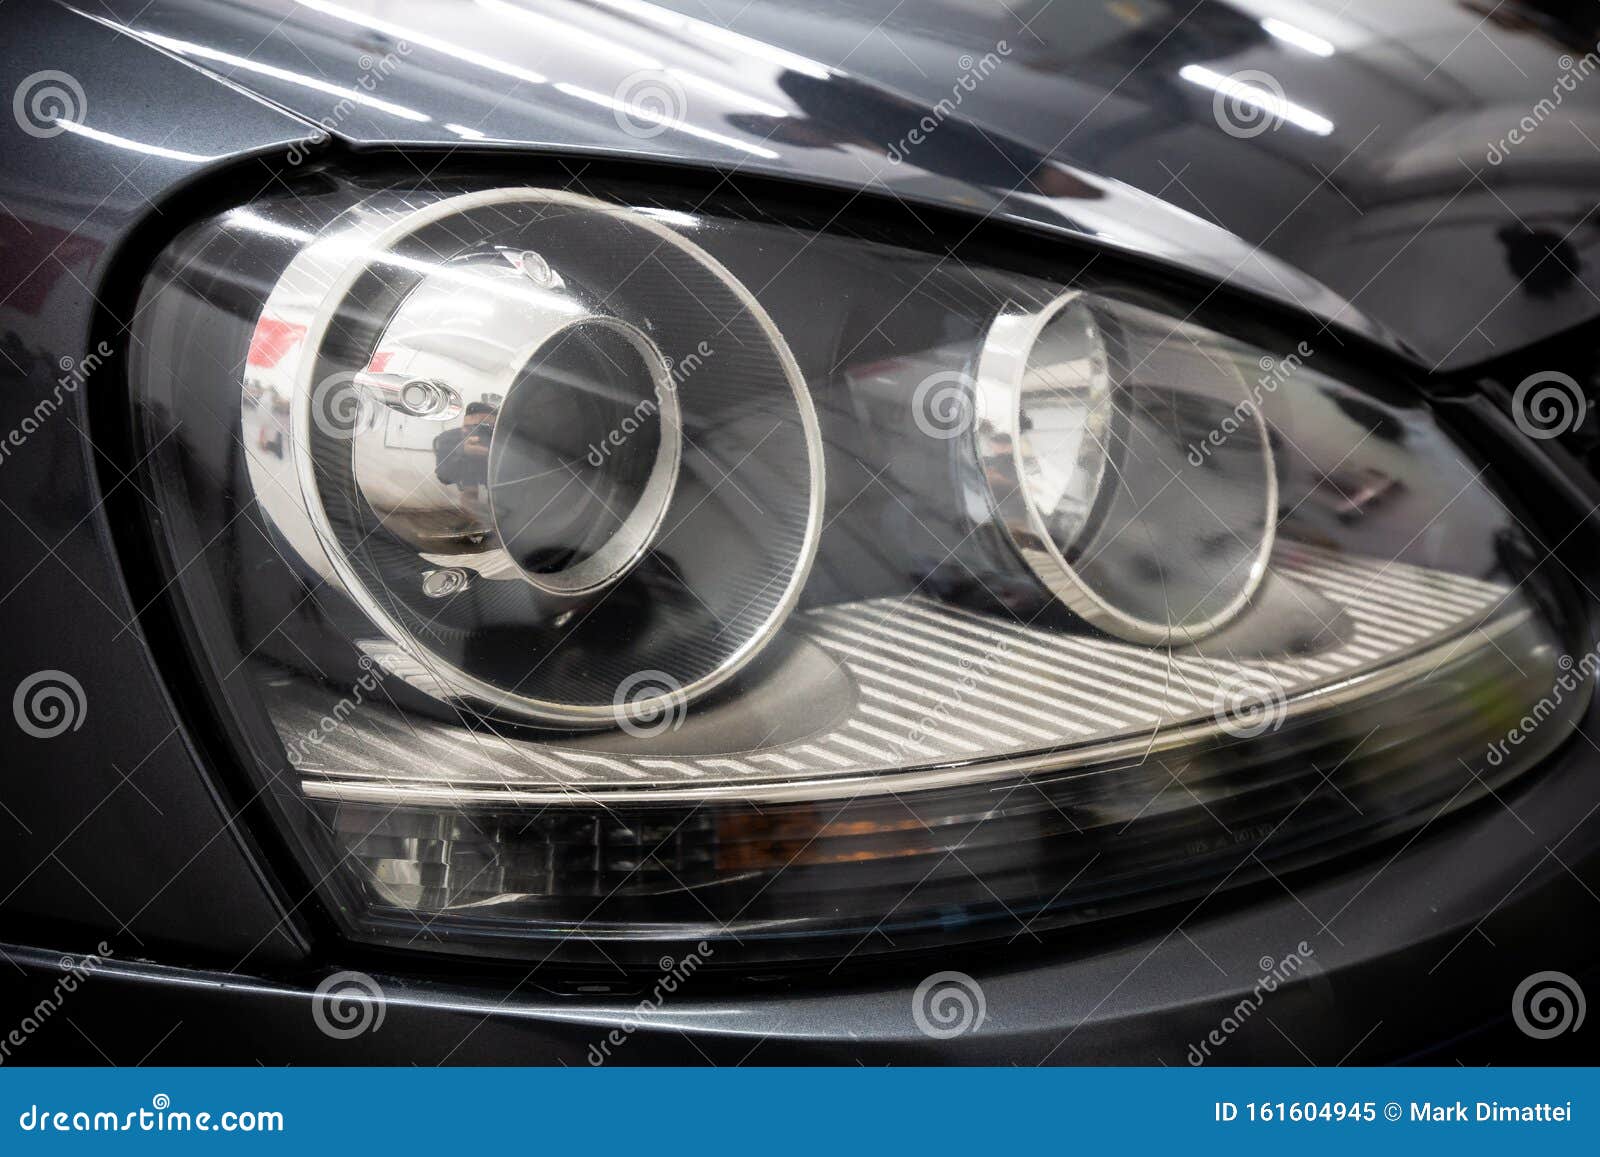 clean and restored car headlight after restoration